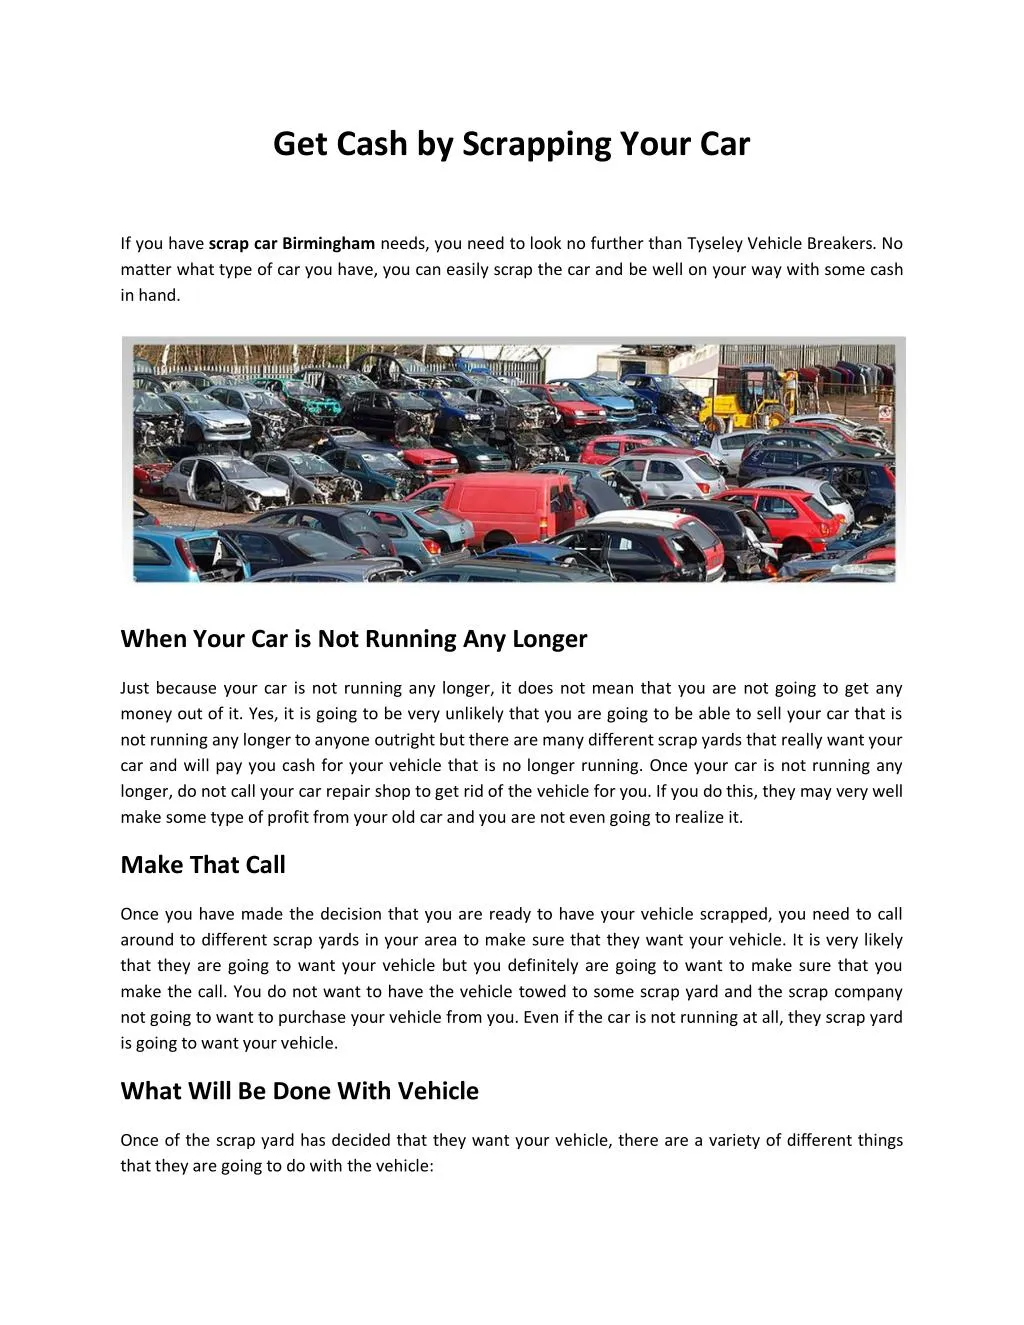 get cash by scrapping your car n.